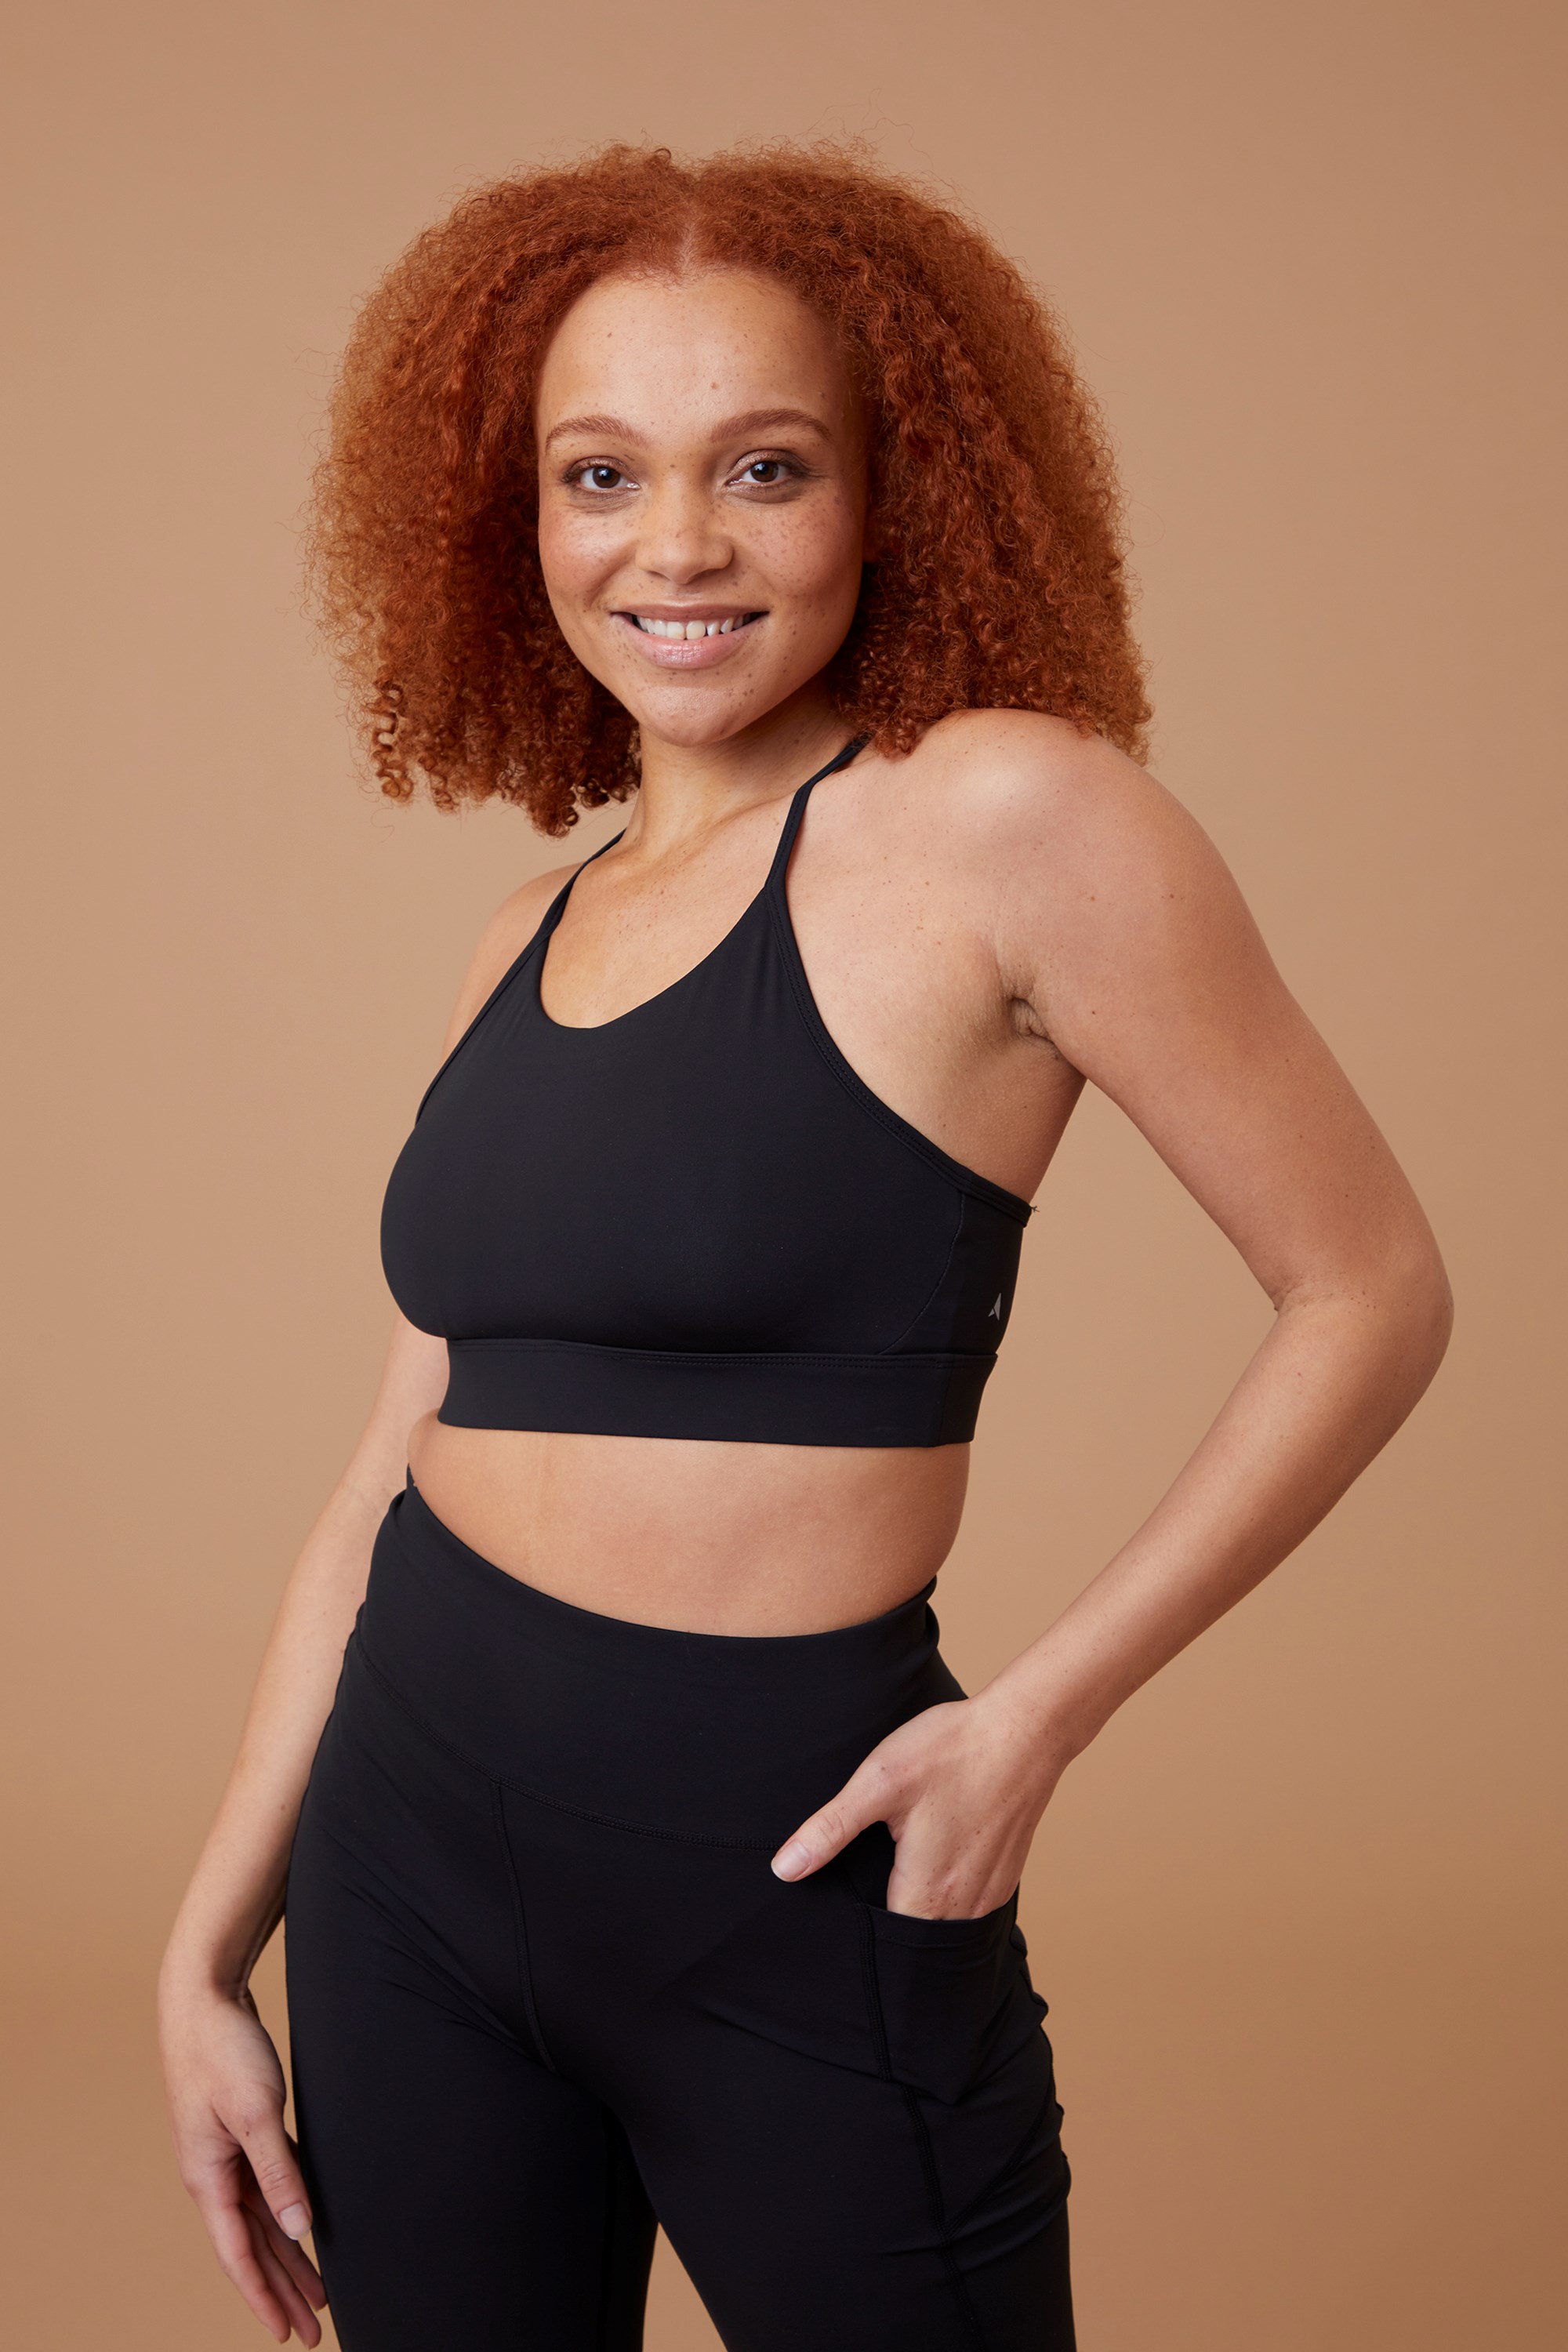 XL Sports - The sports bra that stands out from all the others. The Pace sports  bra from New Balance offers support, comfort and style in one great  package. Krazy Sale is